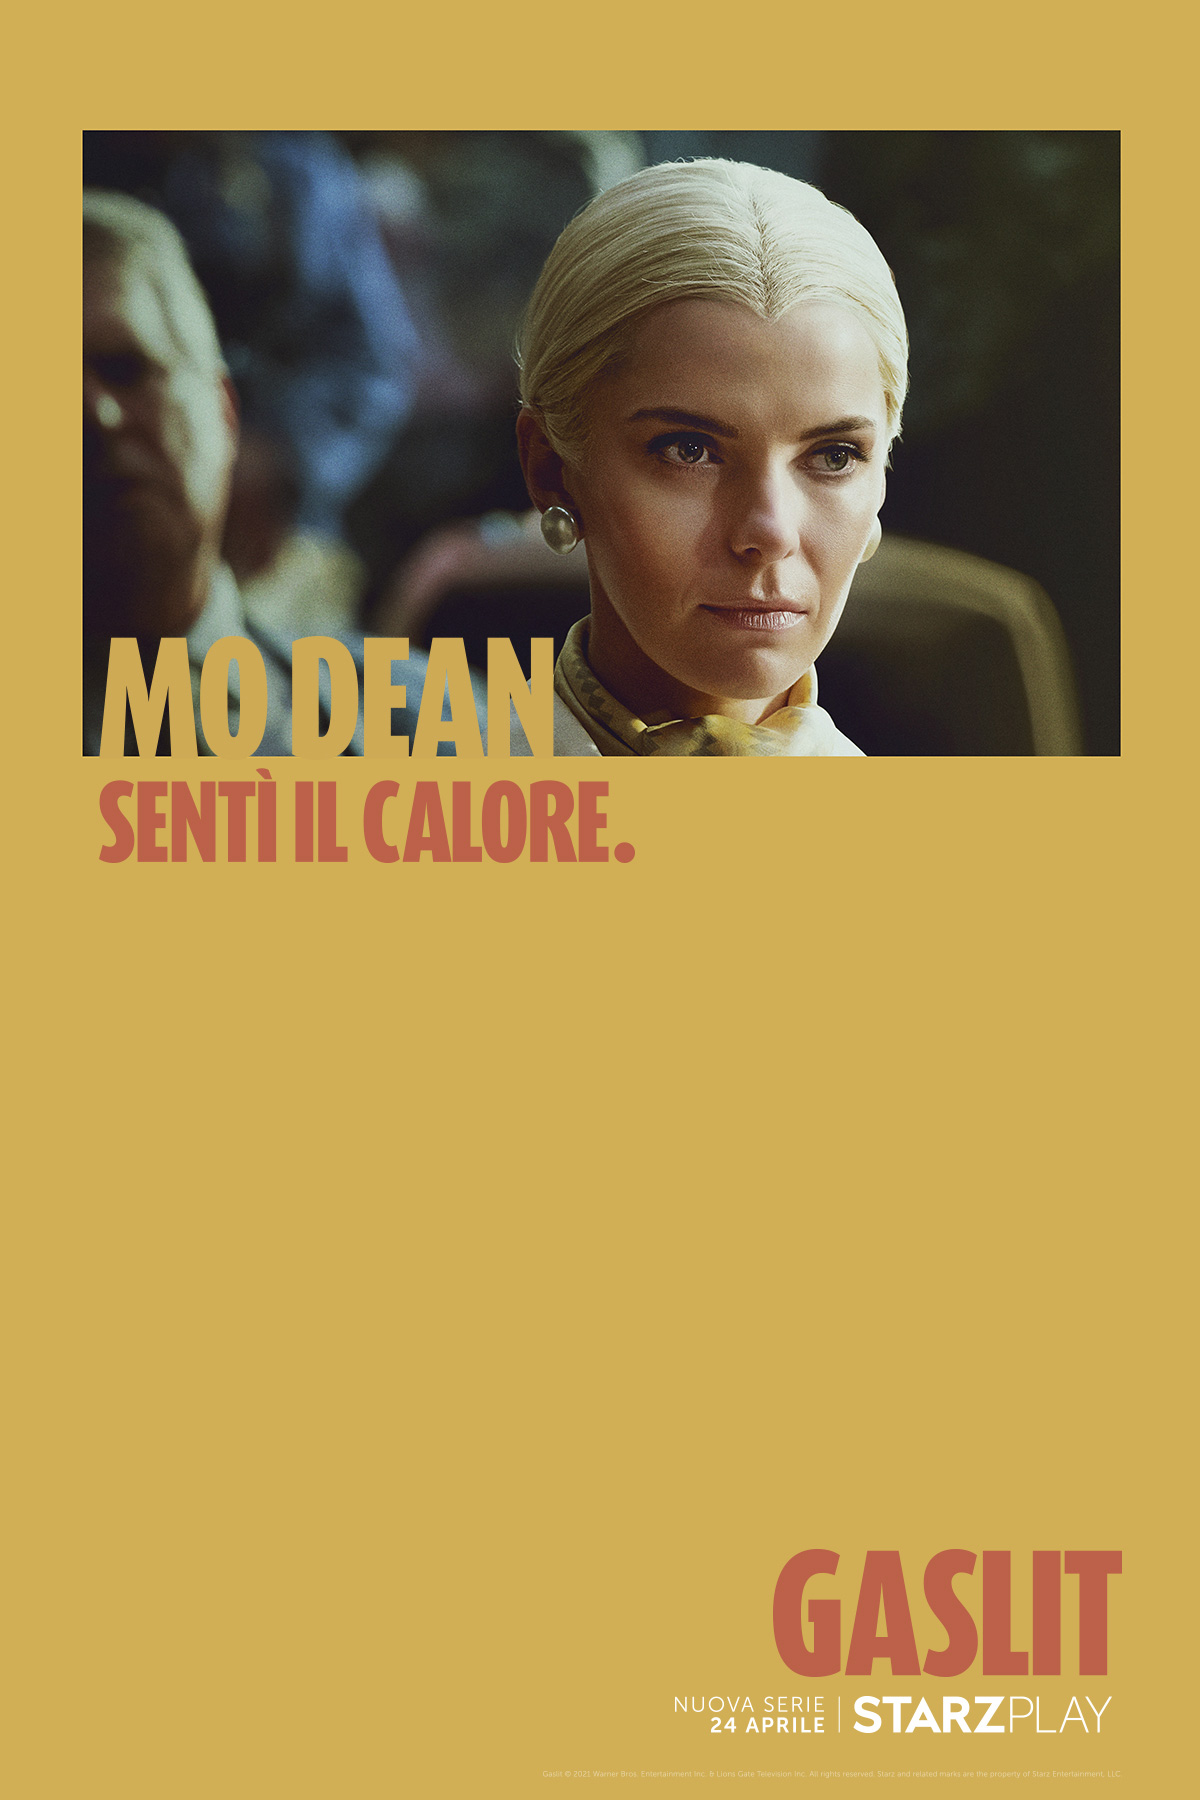 Character Poster Mo Dean [credit: The Refinery Agency; Copyright 2021 Warner Bros. Entertainment Inc. and Lions Gate Television Inc. All rights reserved. Artwork Copyright Starz Entertainment, LLC.]